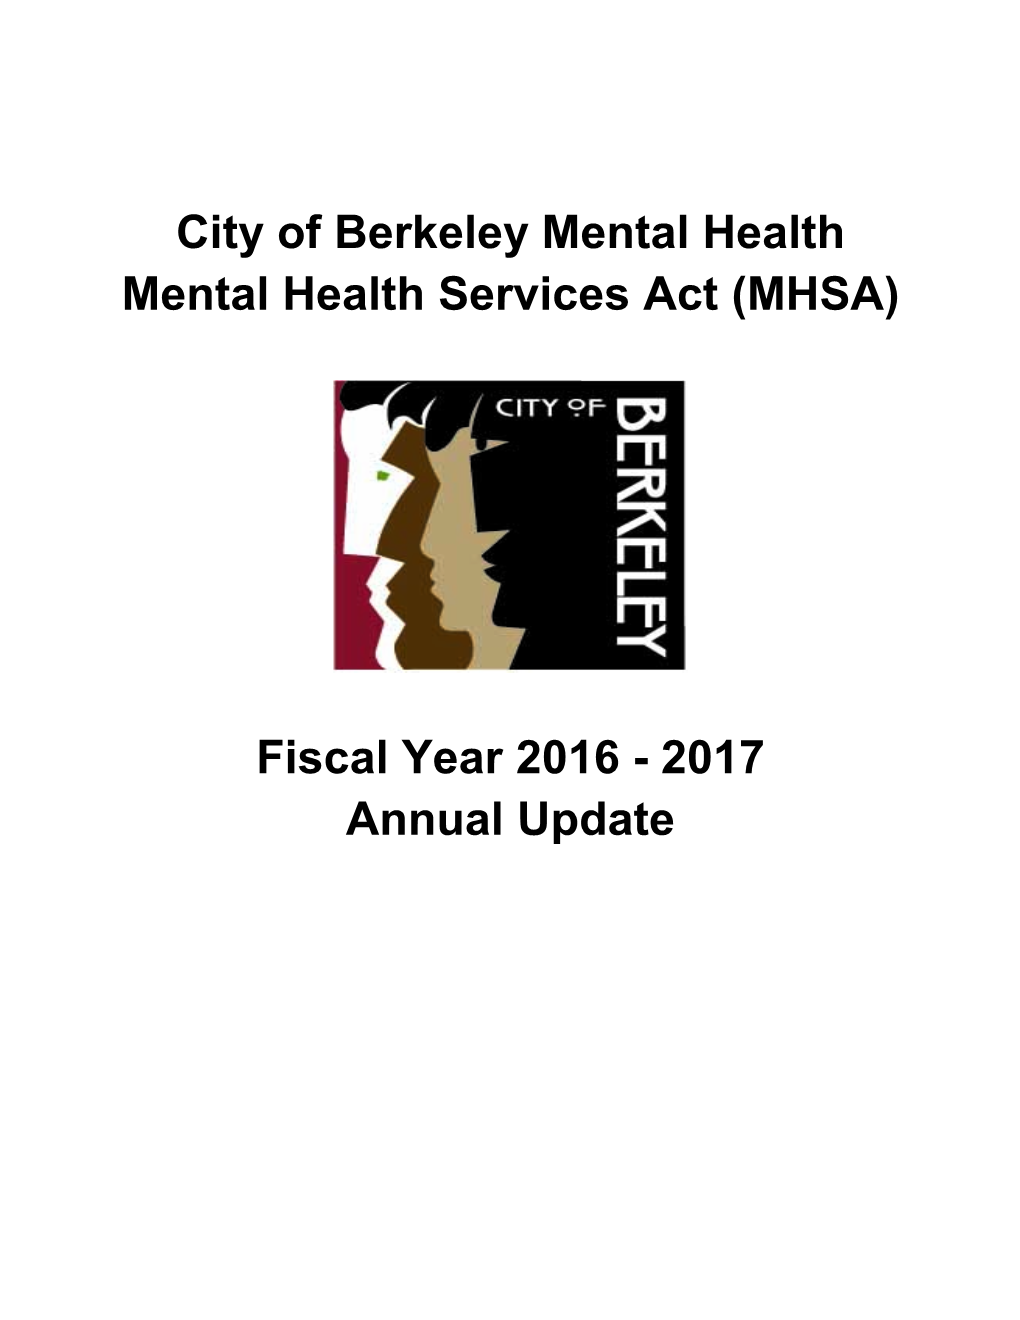 City of Berkeley Mental Health Mental Health Services Act (MHSA) Fiscal